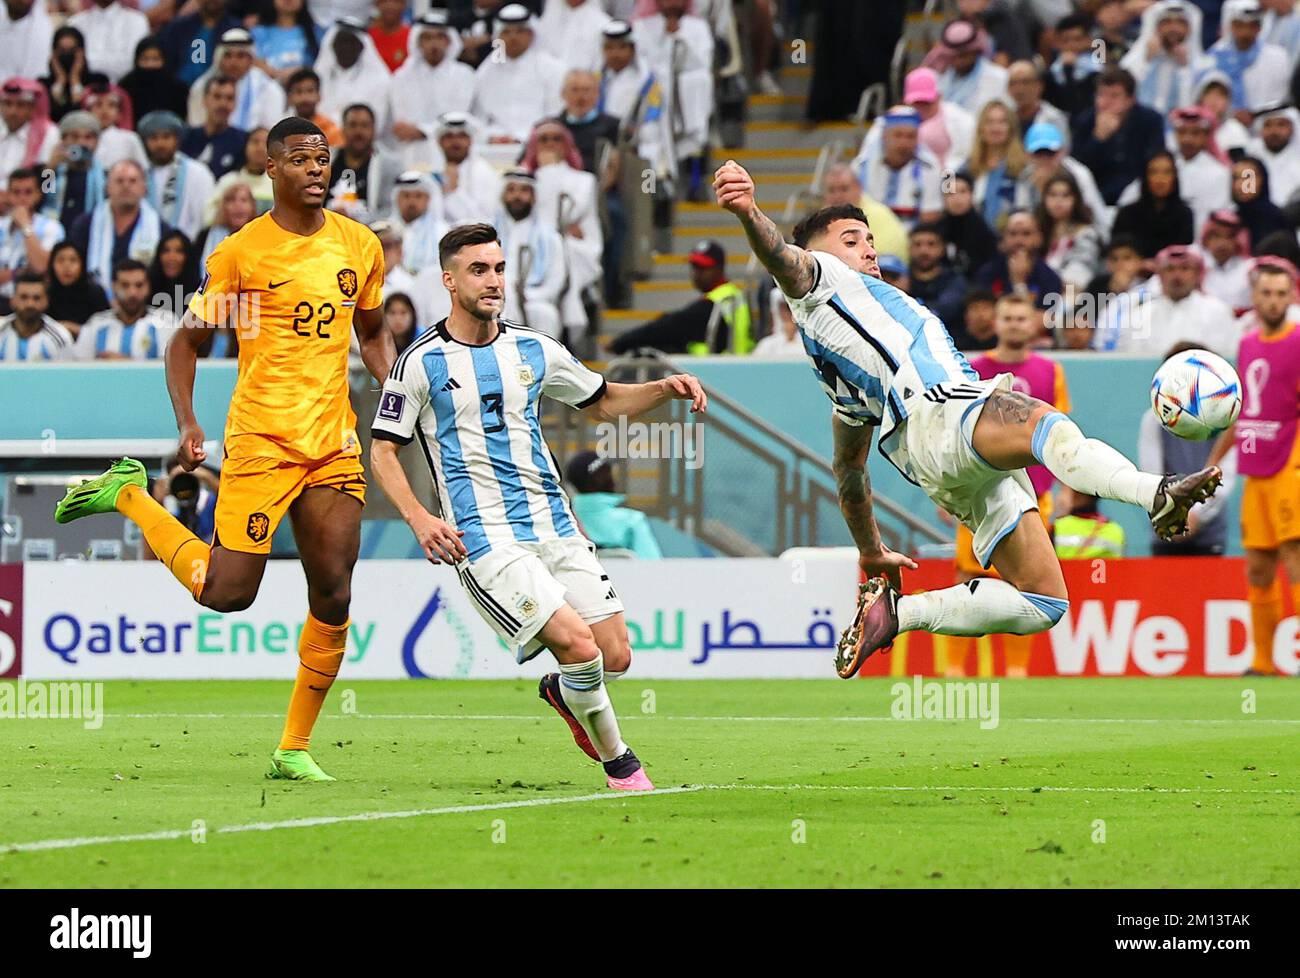 Lusail, Qatar. 9th Dec, 2022. Nicolas Otamendi (R) of Argentina competes during the Quarterfinal between the Netherlands and Argentina of the 2022 FIFA World Cup at Lusail Stadium in Lusail, Qatar, Dec. 9, 2022. Credit: Ding Xu/Xinhua/Alamy Live News Stock Photo